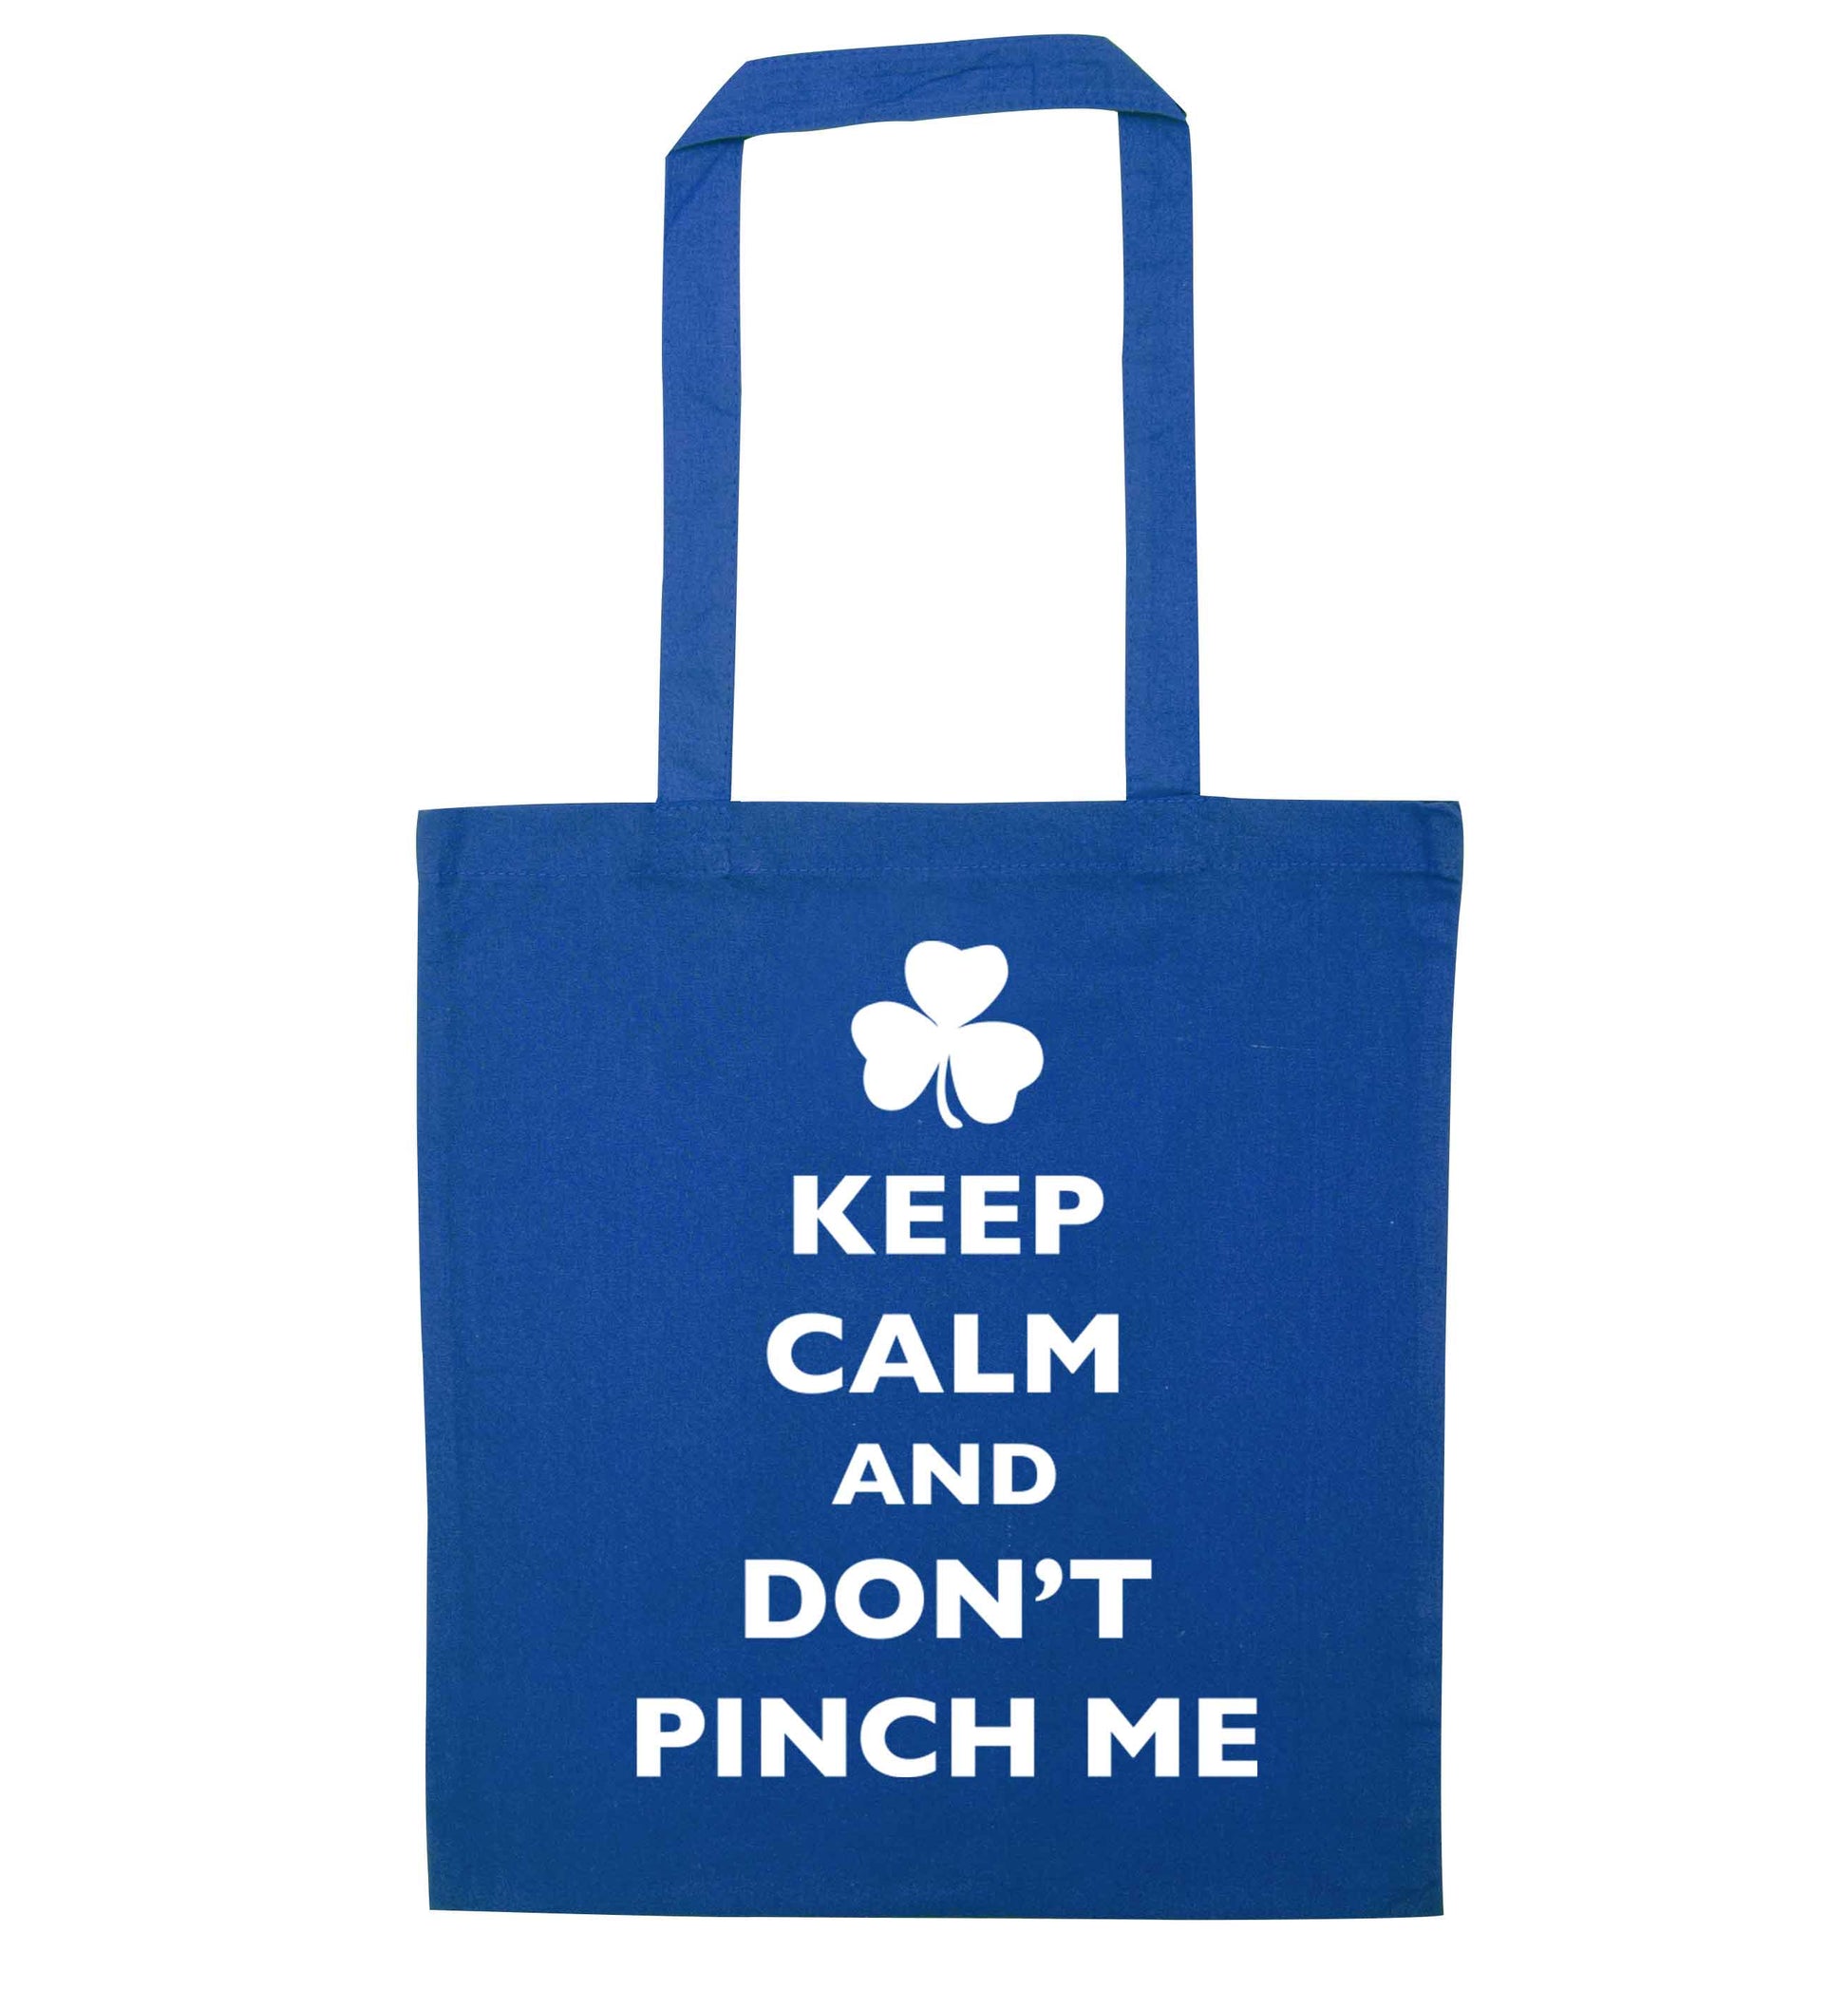 Keep calm and don't pinch me blue tote bag